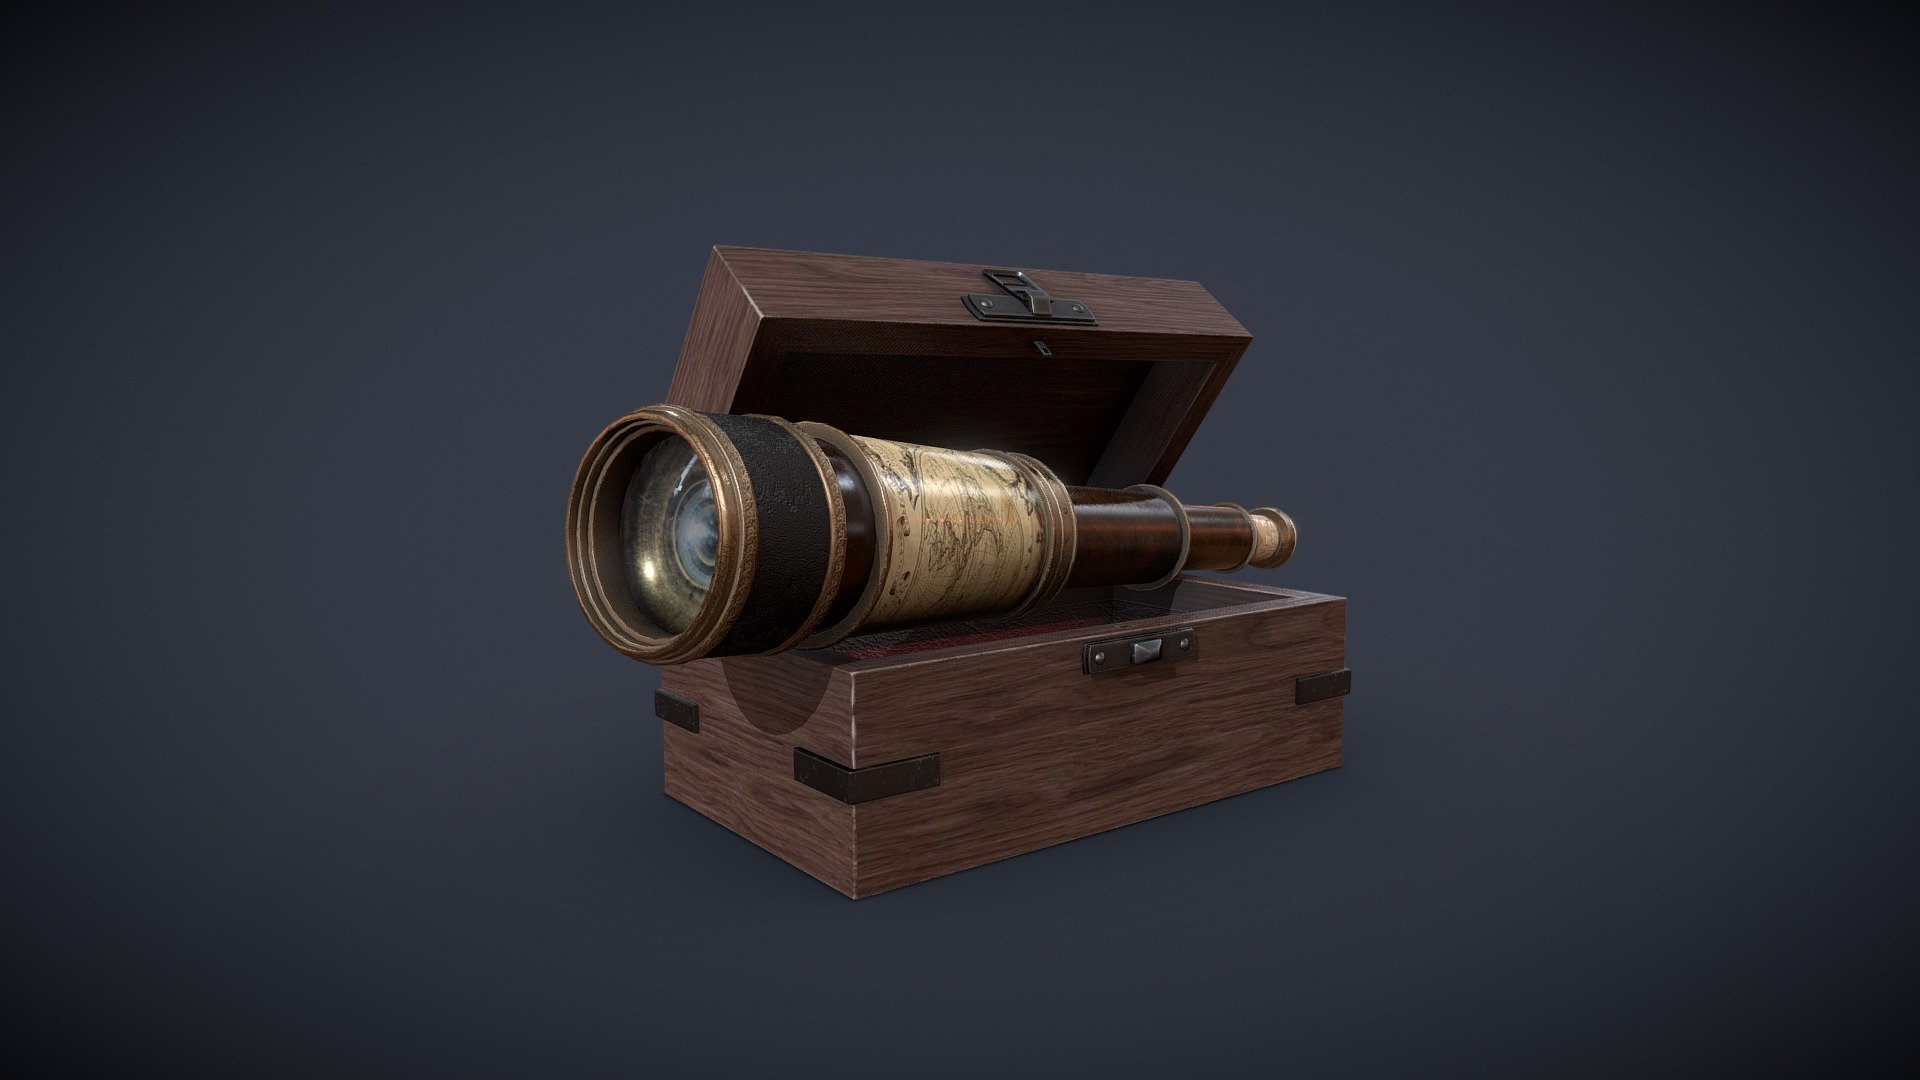 Hi All ! This is a new asset for a victorian project to decorate shelf or librairy. A wooden victorian telescope easy to take for traveling.

Made with Maya, PS and Substance.

You will find in the package Scene file, FBX and 2k Textures.
If you have any customs need, please feel free to contact me 3d model